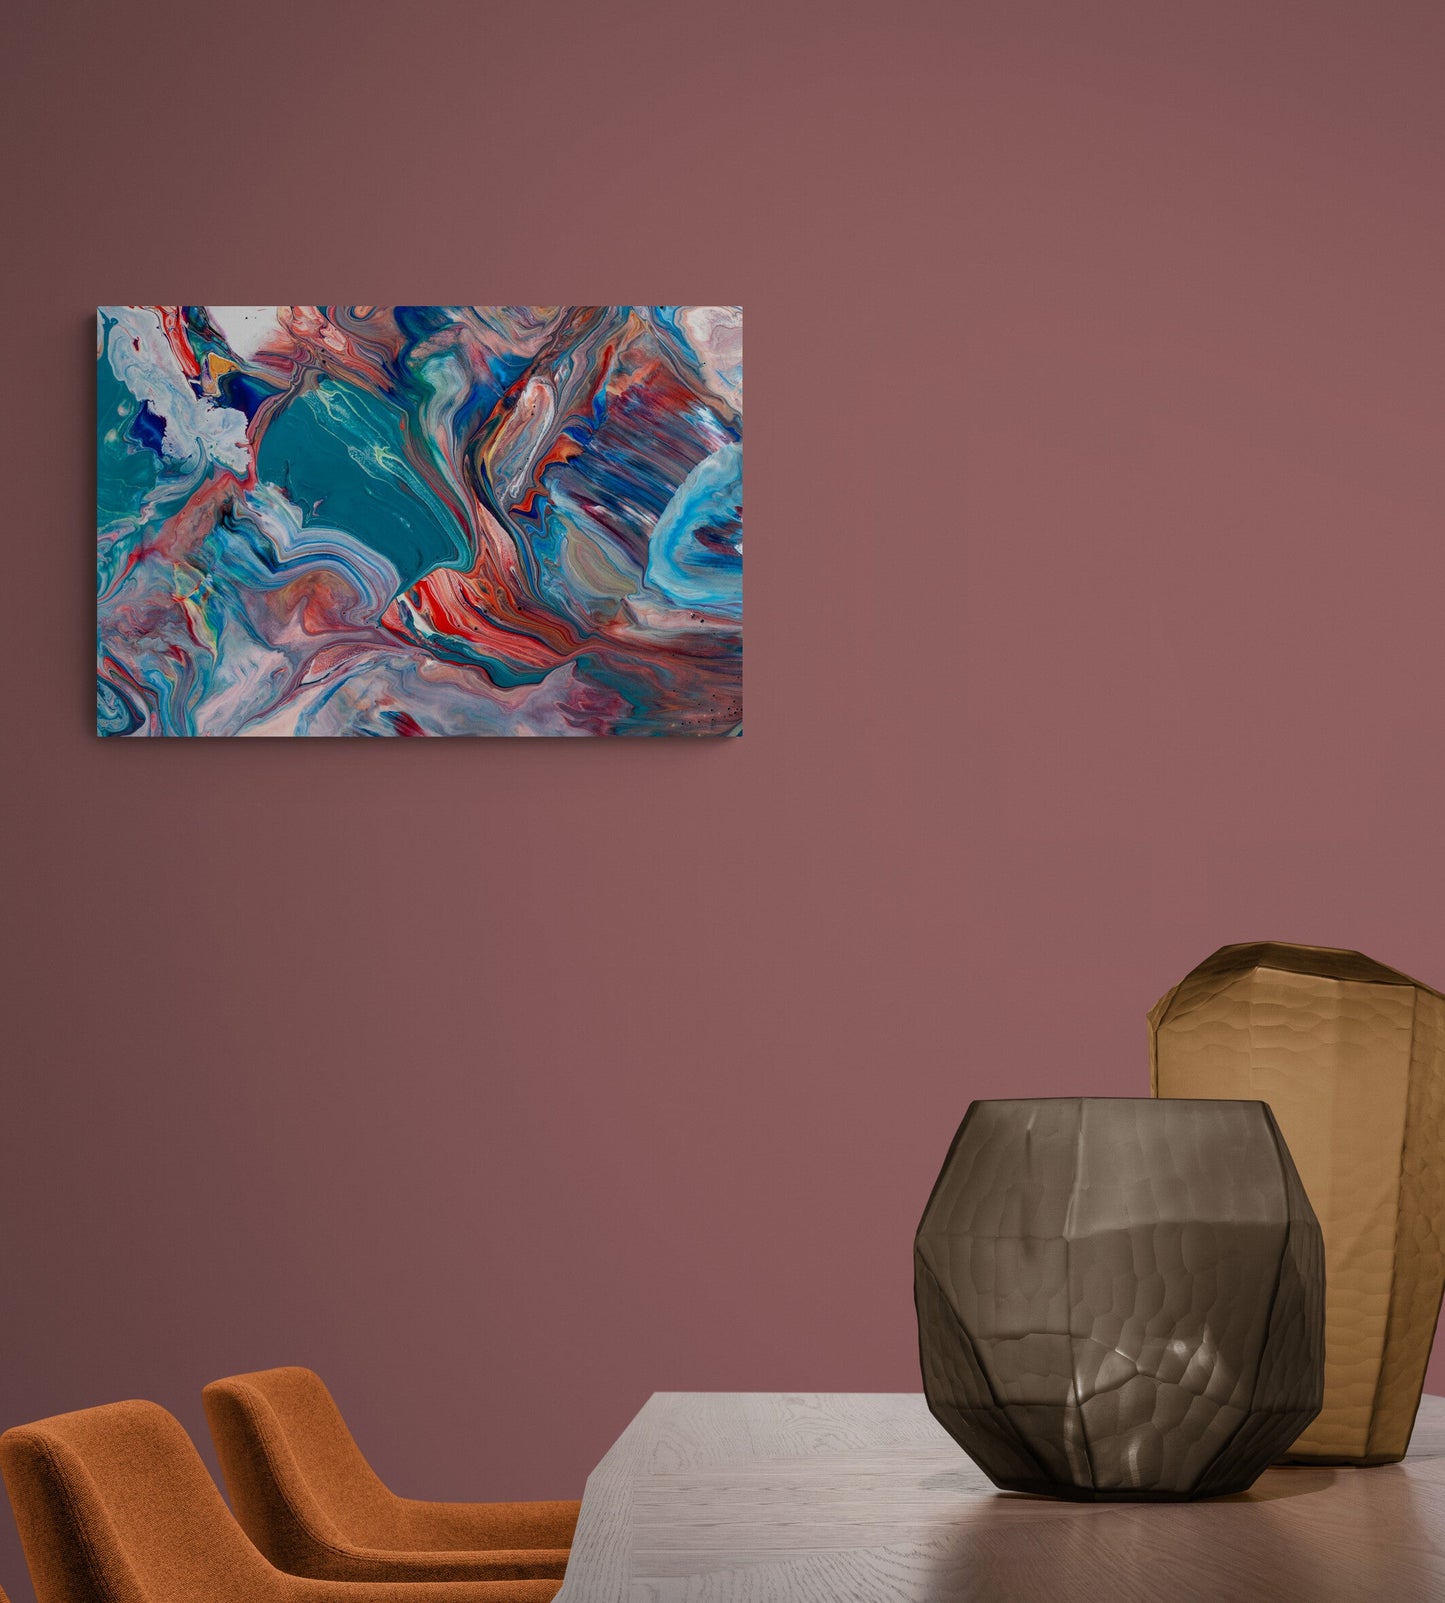 Vibrant Layers: Abstract Art on Natural Canvas to Energize Your Space